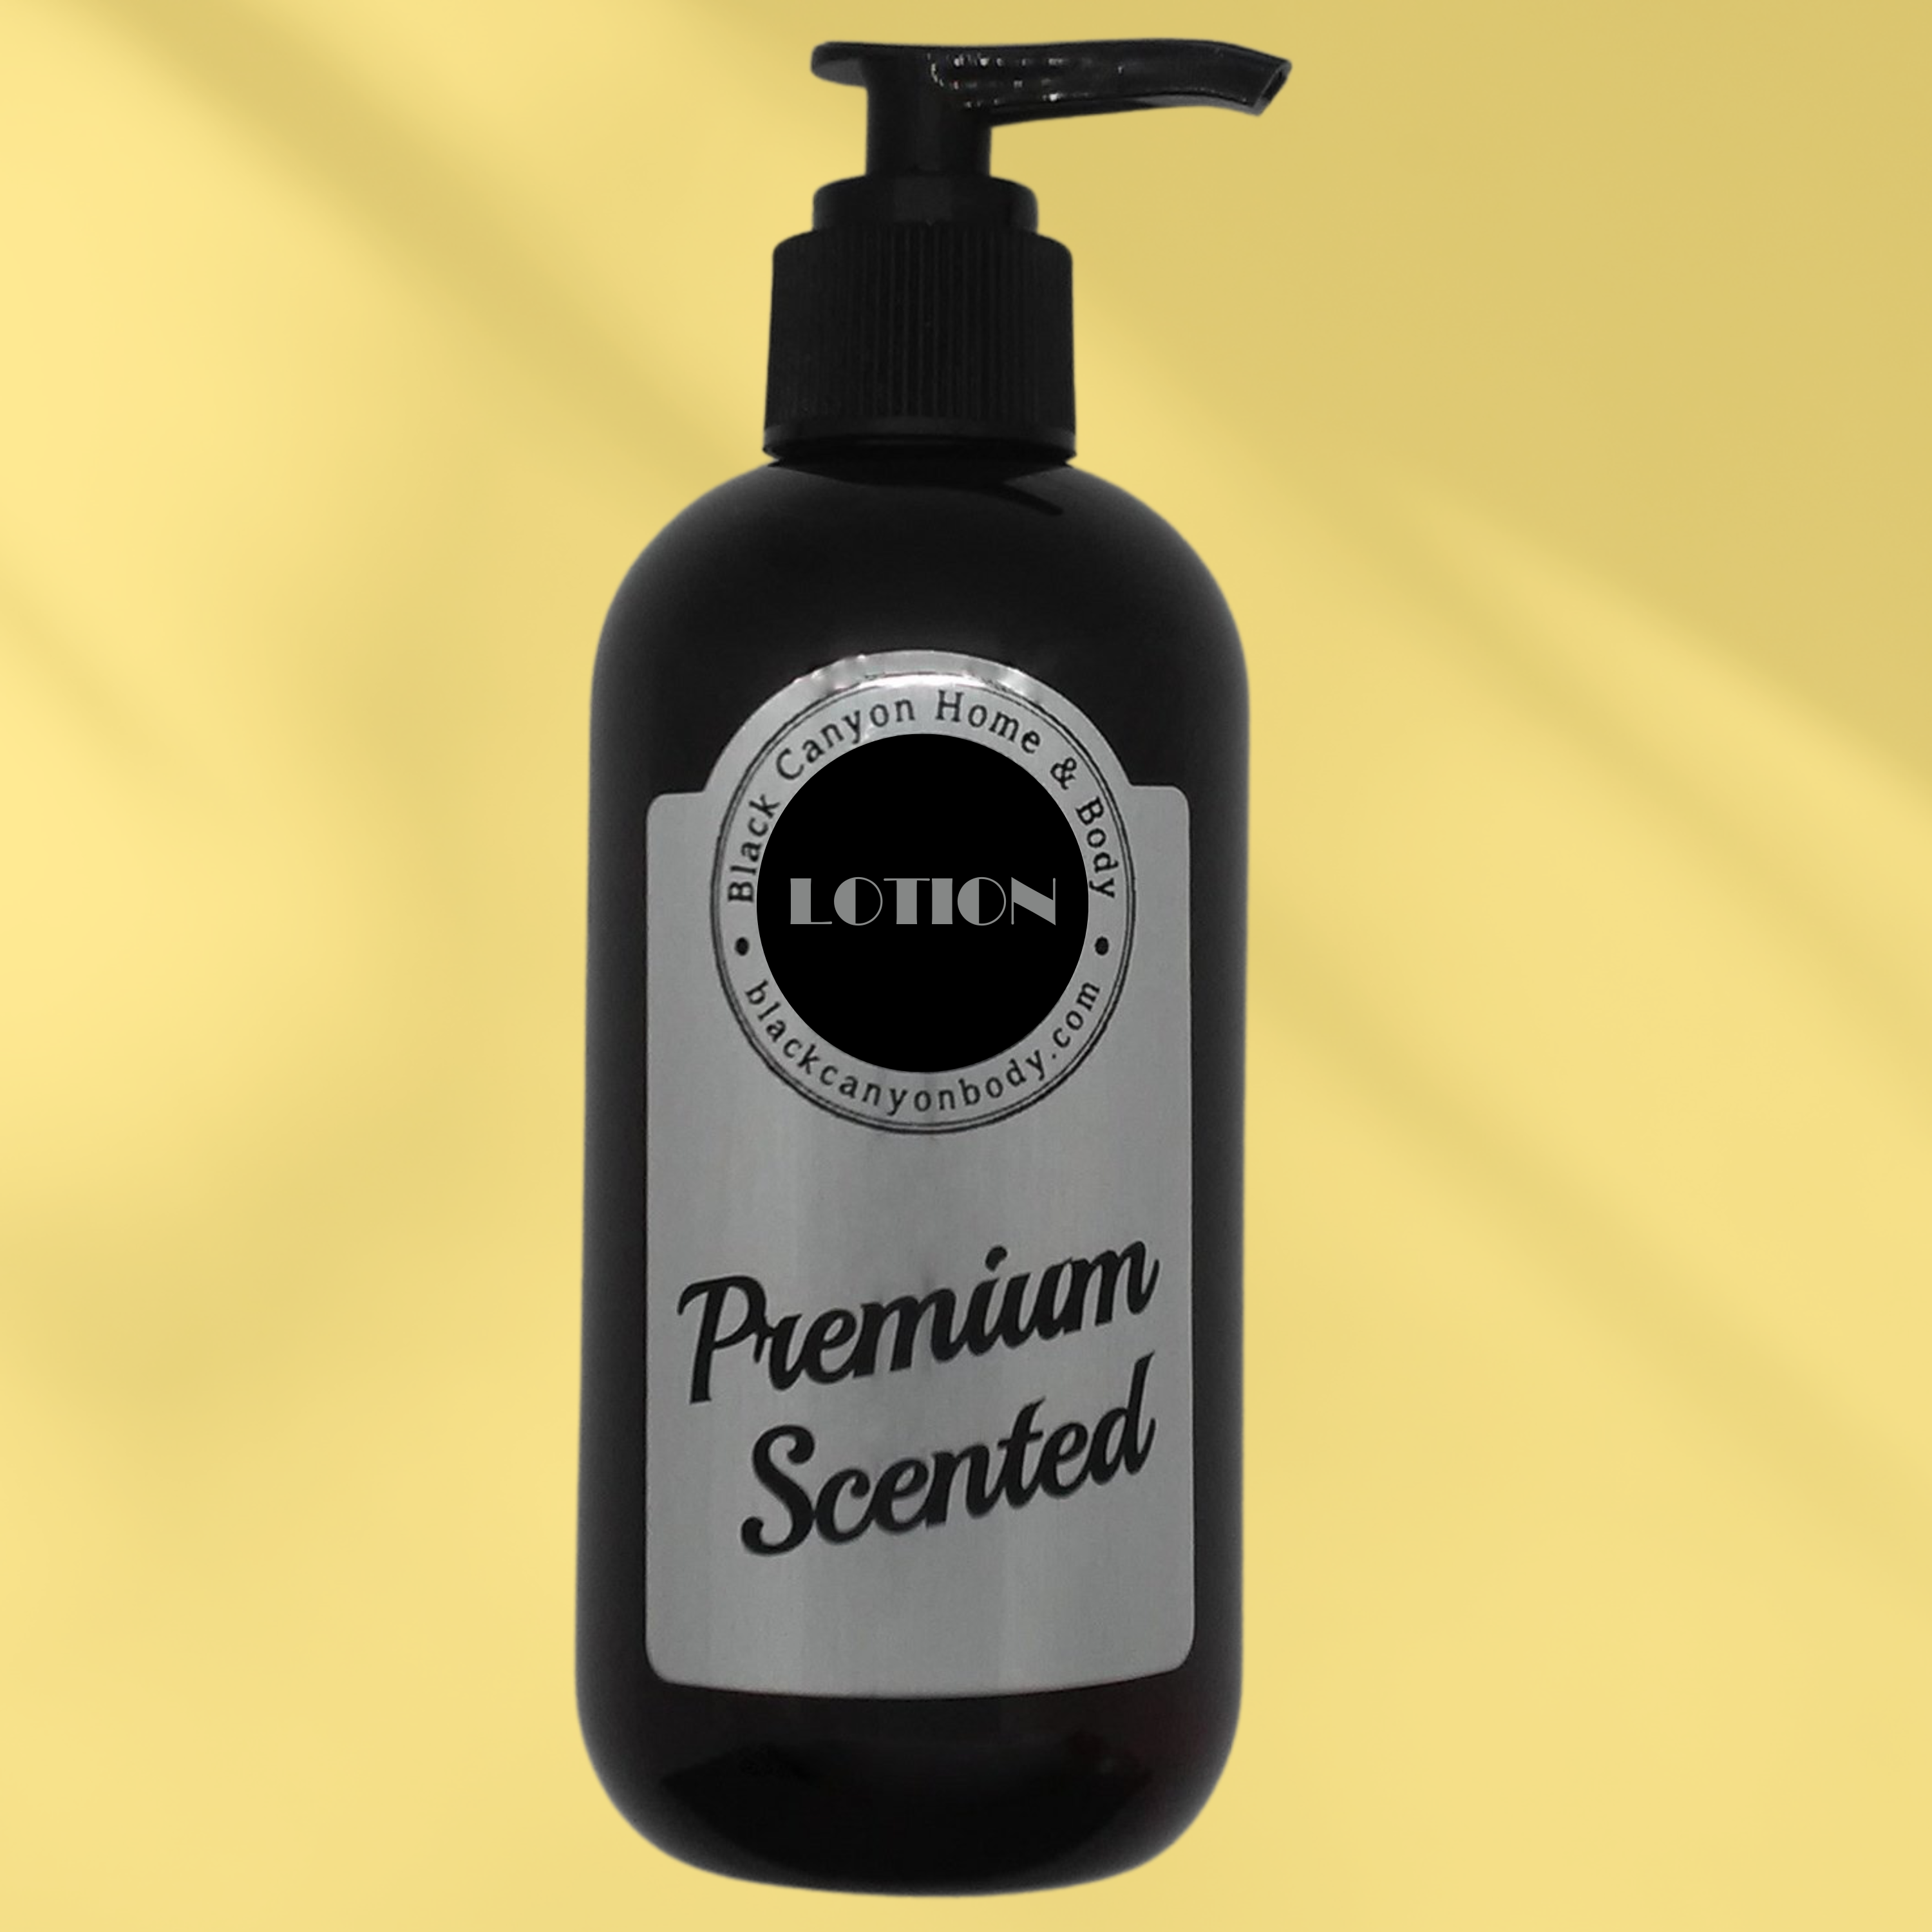 Paydens Cobalt Sapphire Pools Scented Luxury Body Lotion with Lanolin and Jojoba Oil For Men